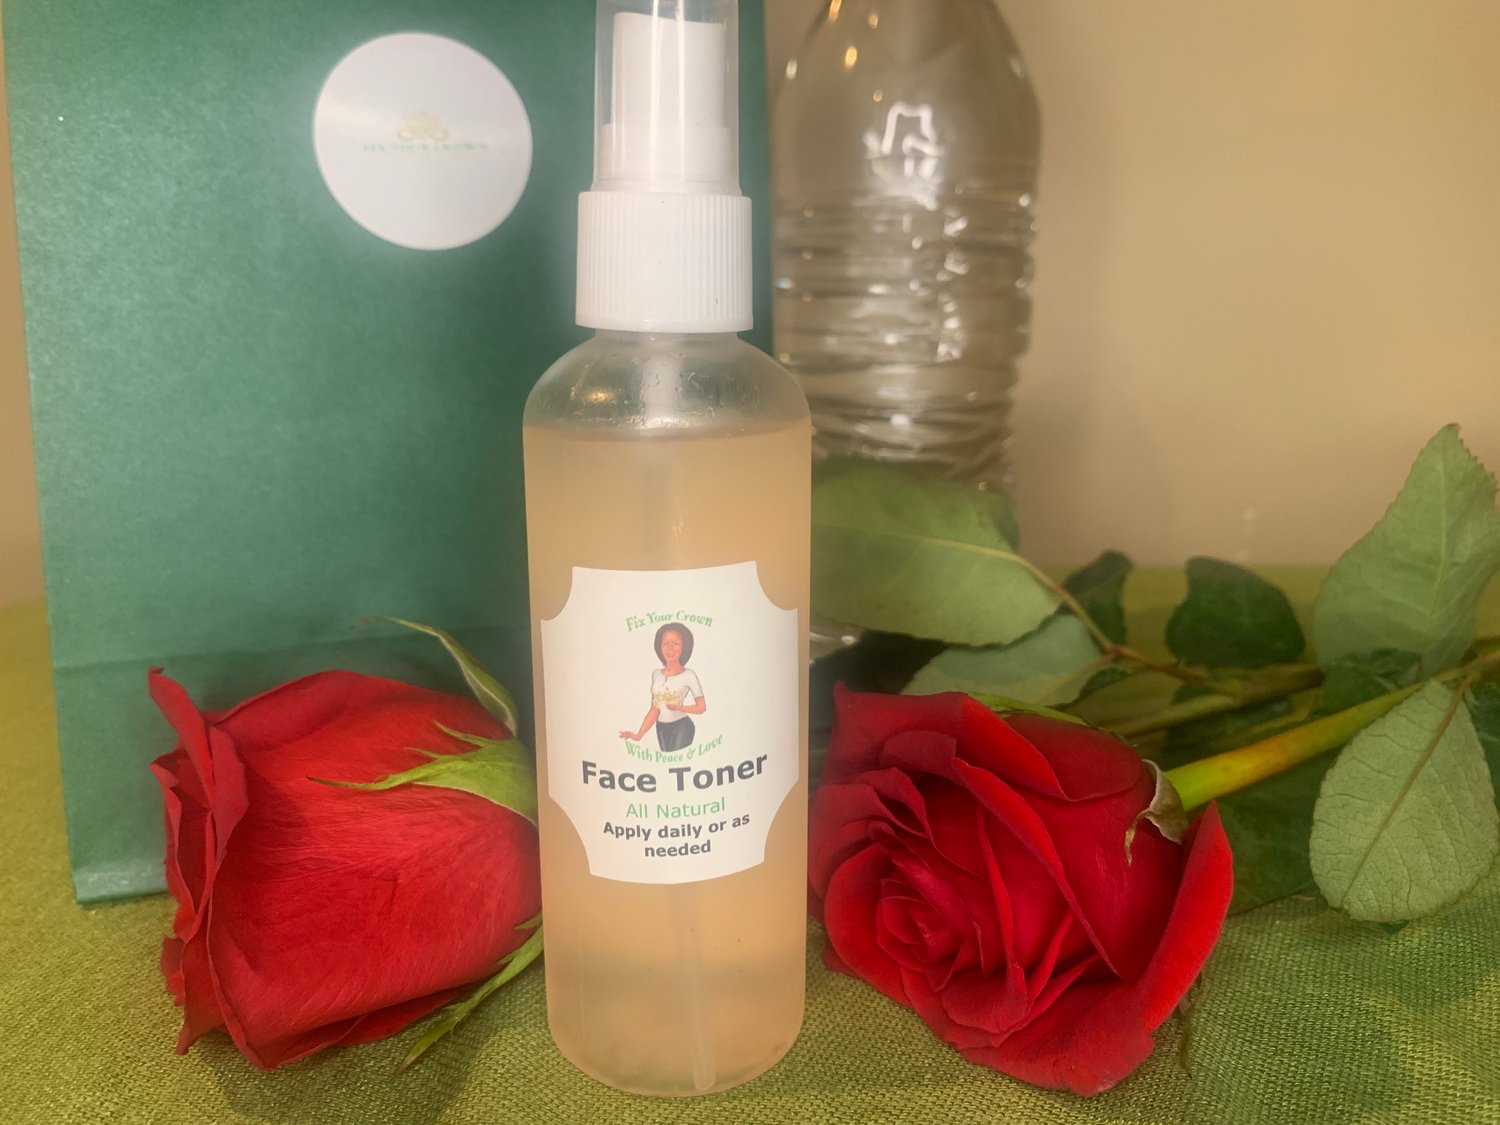 Image of Rose Water Face Toner infused with Rose petals